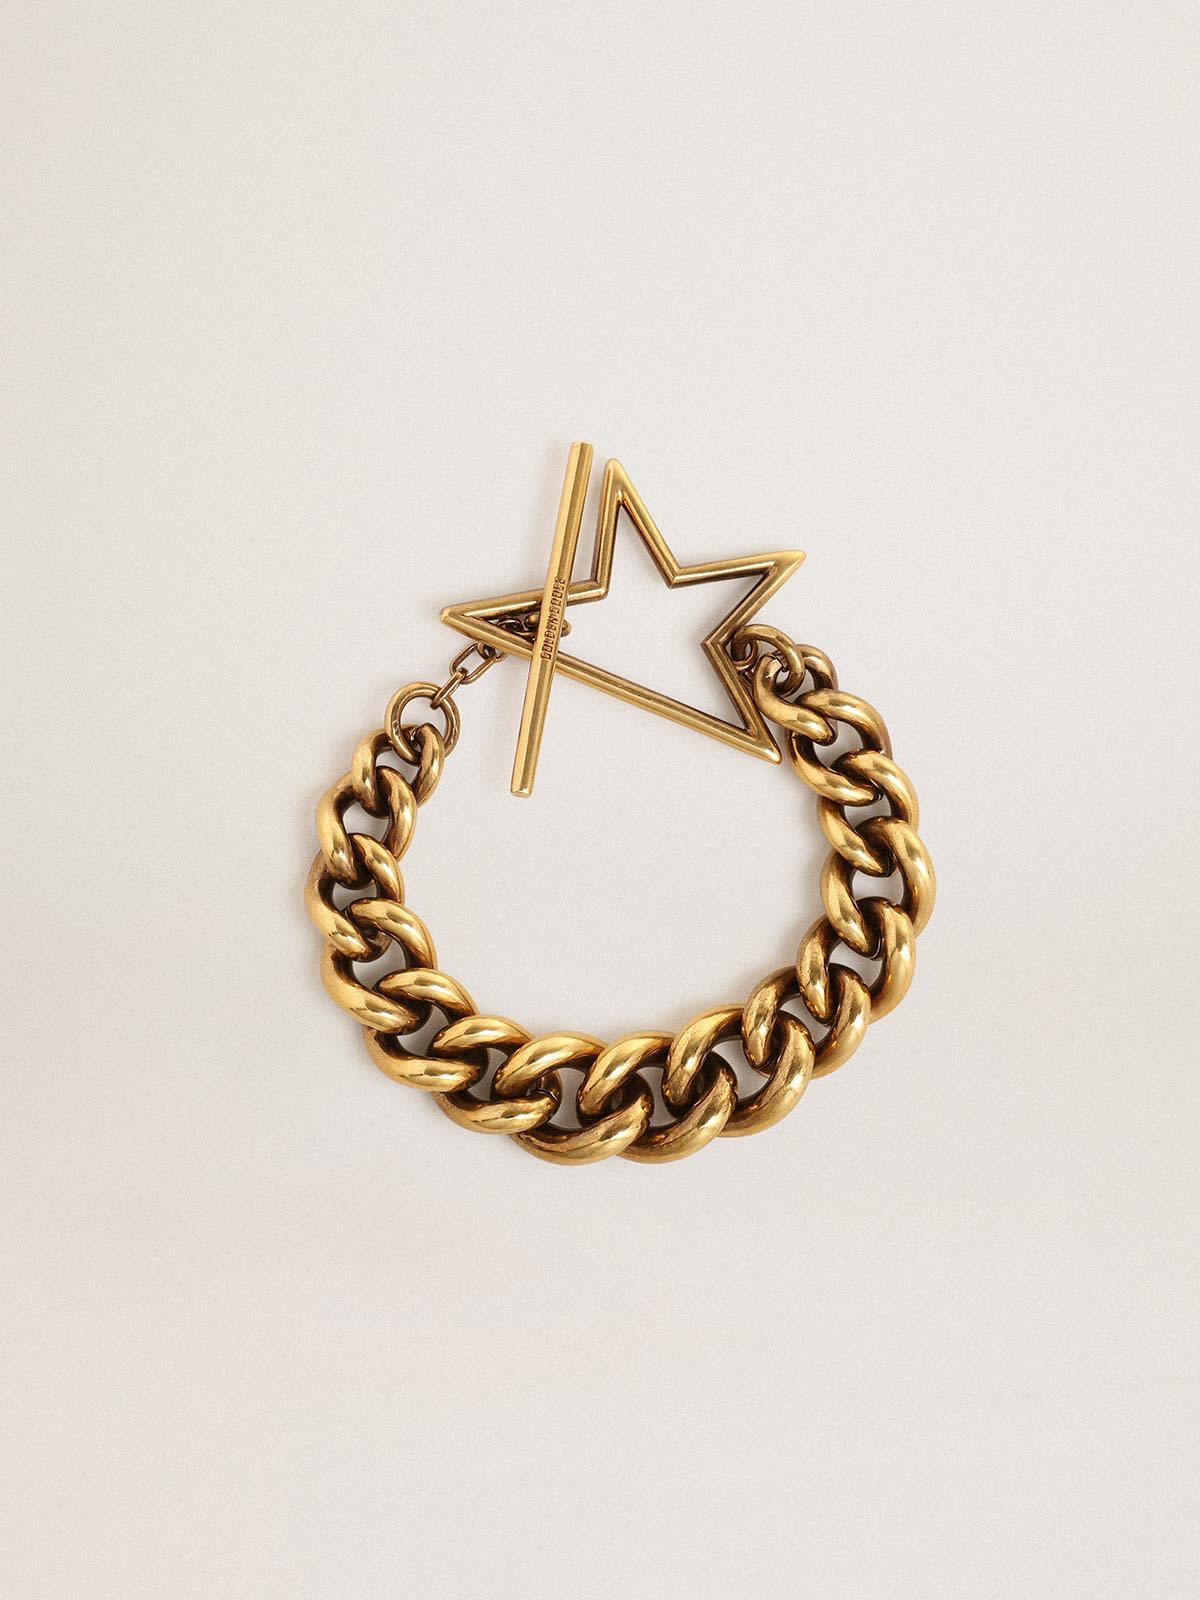 Golden Goose - Bracelet in old gold decreasing chain with star-shaped clasp in 